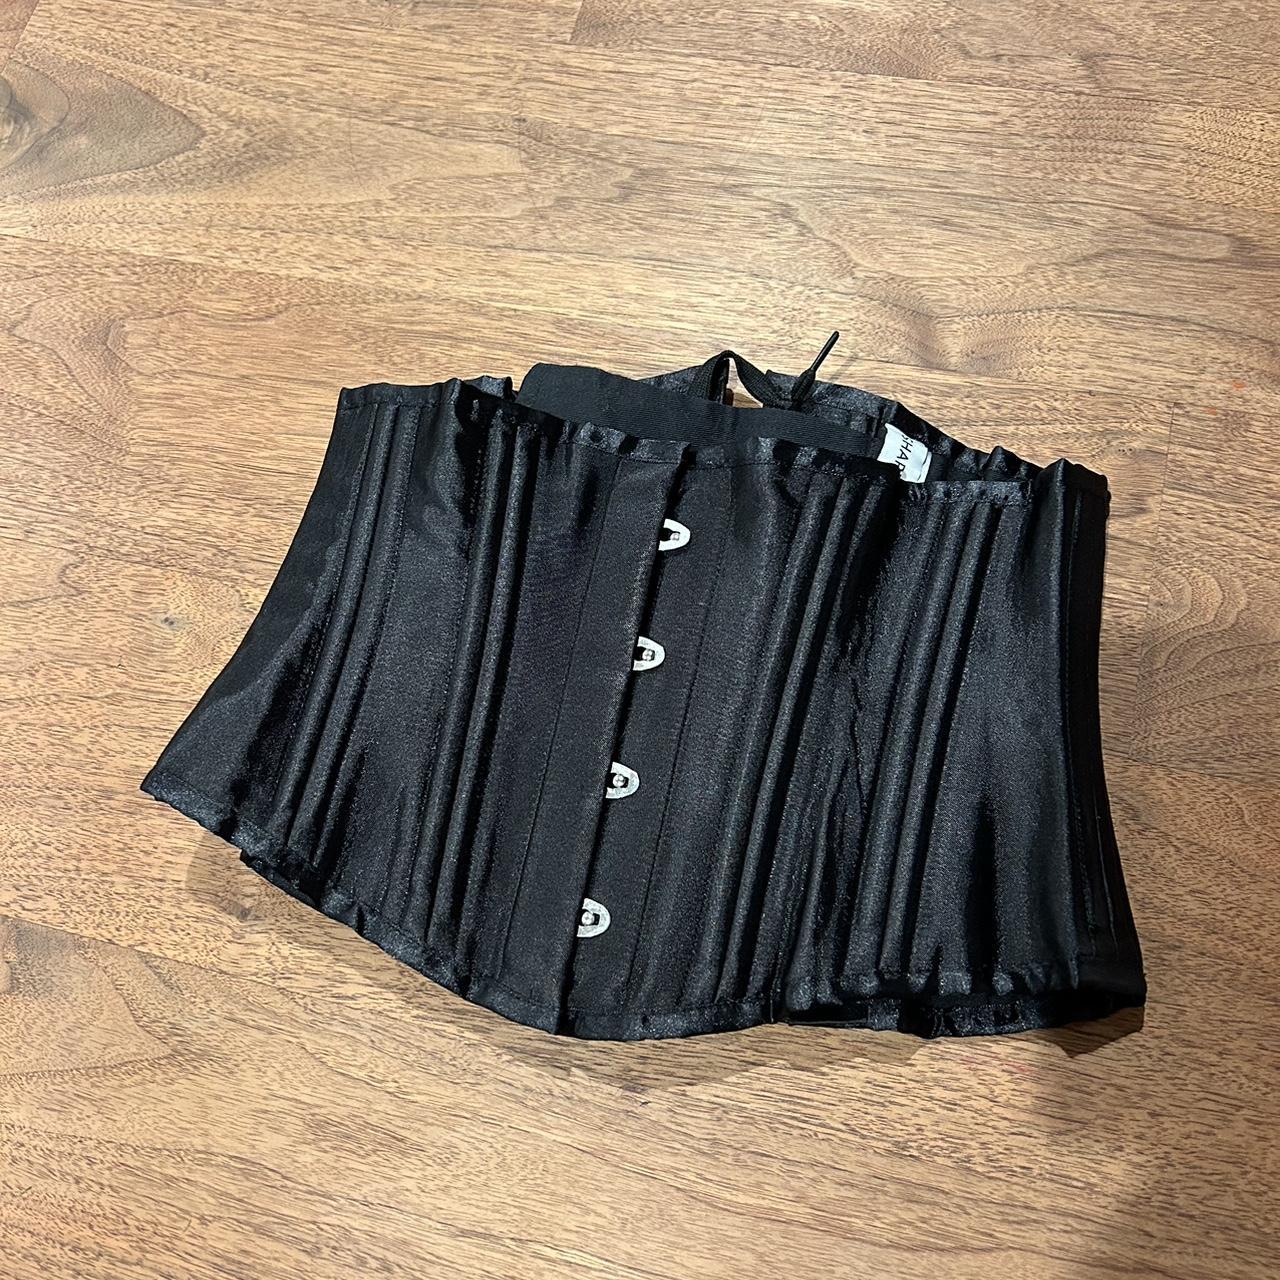 SHAPERX boned corset size M. can be adjusted in the - Depop